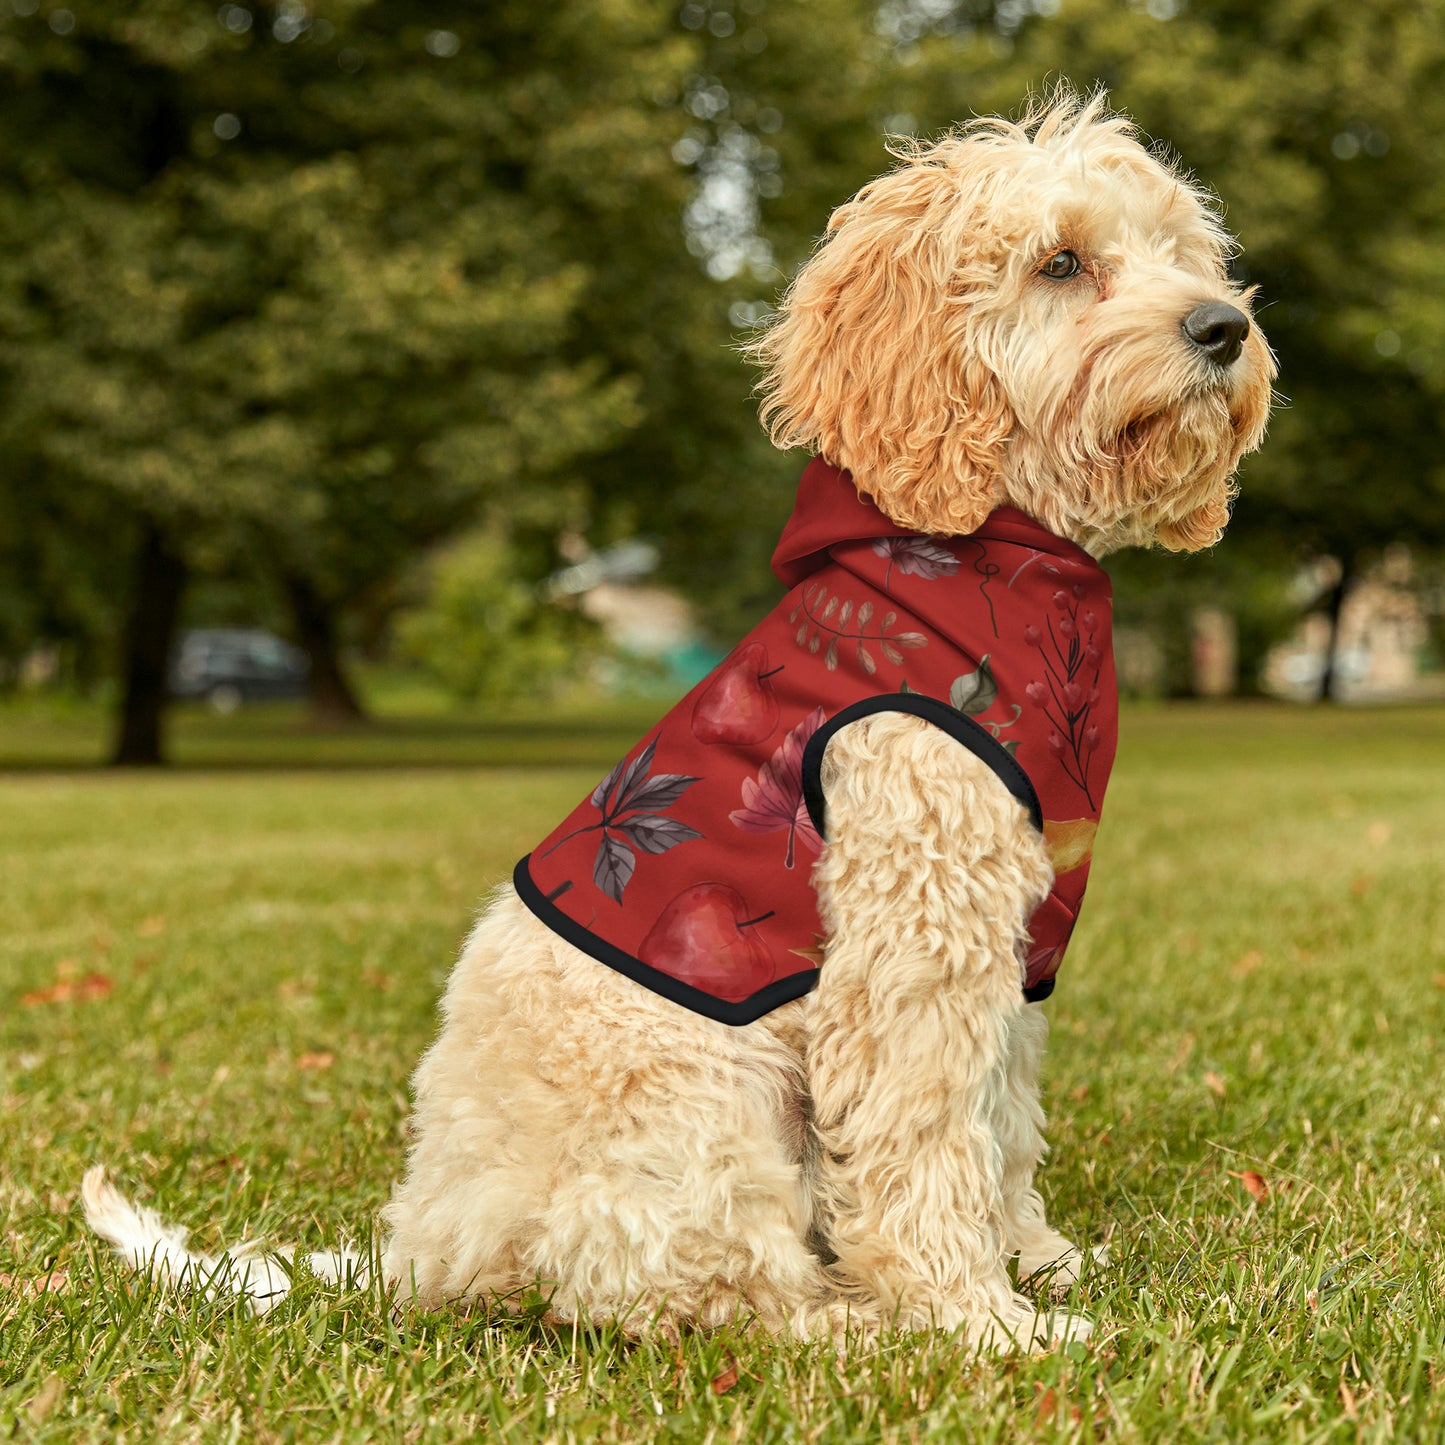 Dog Hoodie - Fall Collection (Fall 5 - With Maroon Hood)